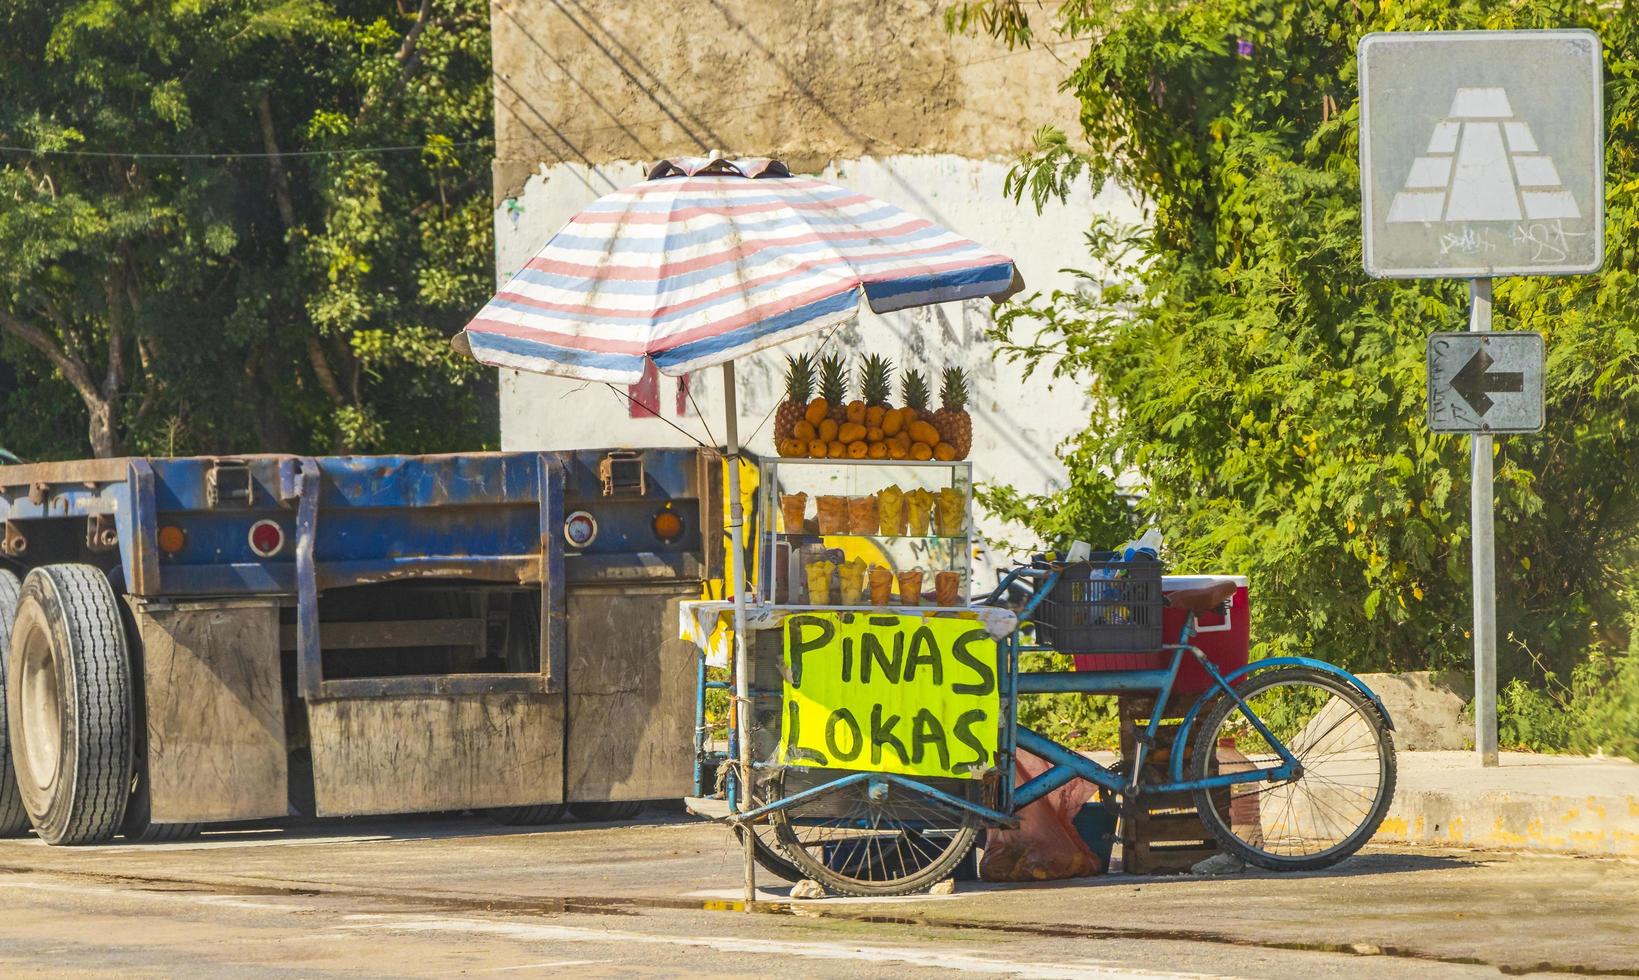 Tulum Quintana Roo Mexico 2022 Street food fruits and drinks on typical street Tulum Mexico. photo